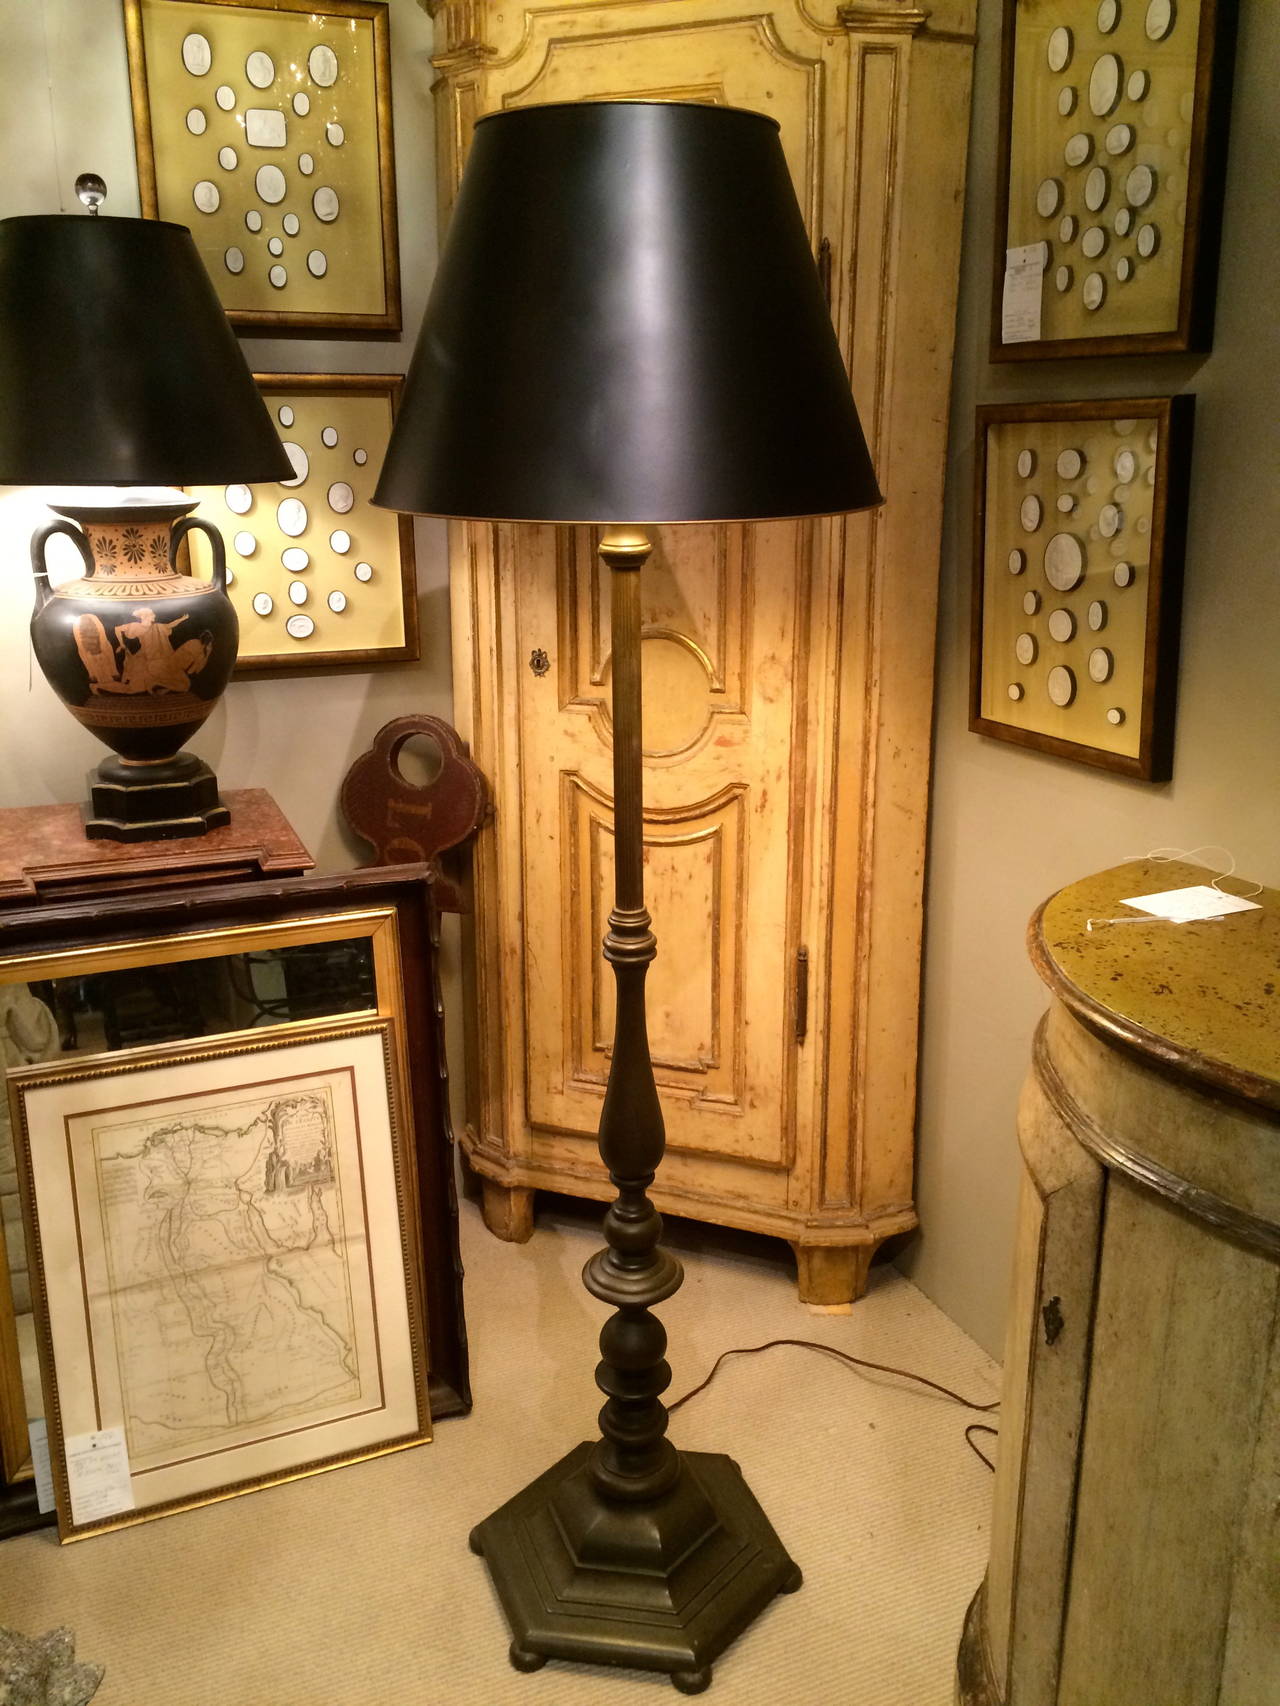 Pair of Baroque style bronze floor lamps, bold with elegant turnings. The turned shaft supported by a hexagonal base with bun feet. 
Top quality, possibly by E. F. Caldwell.